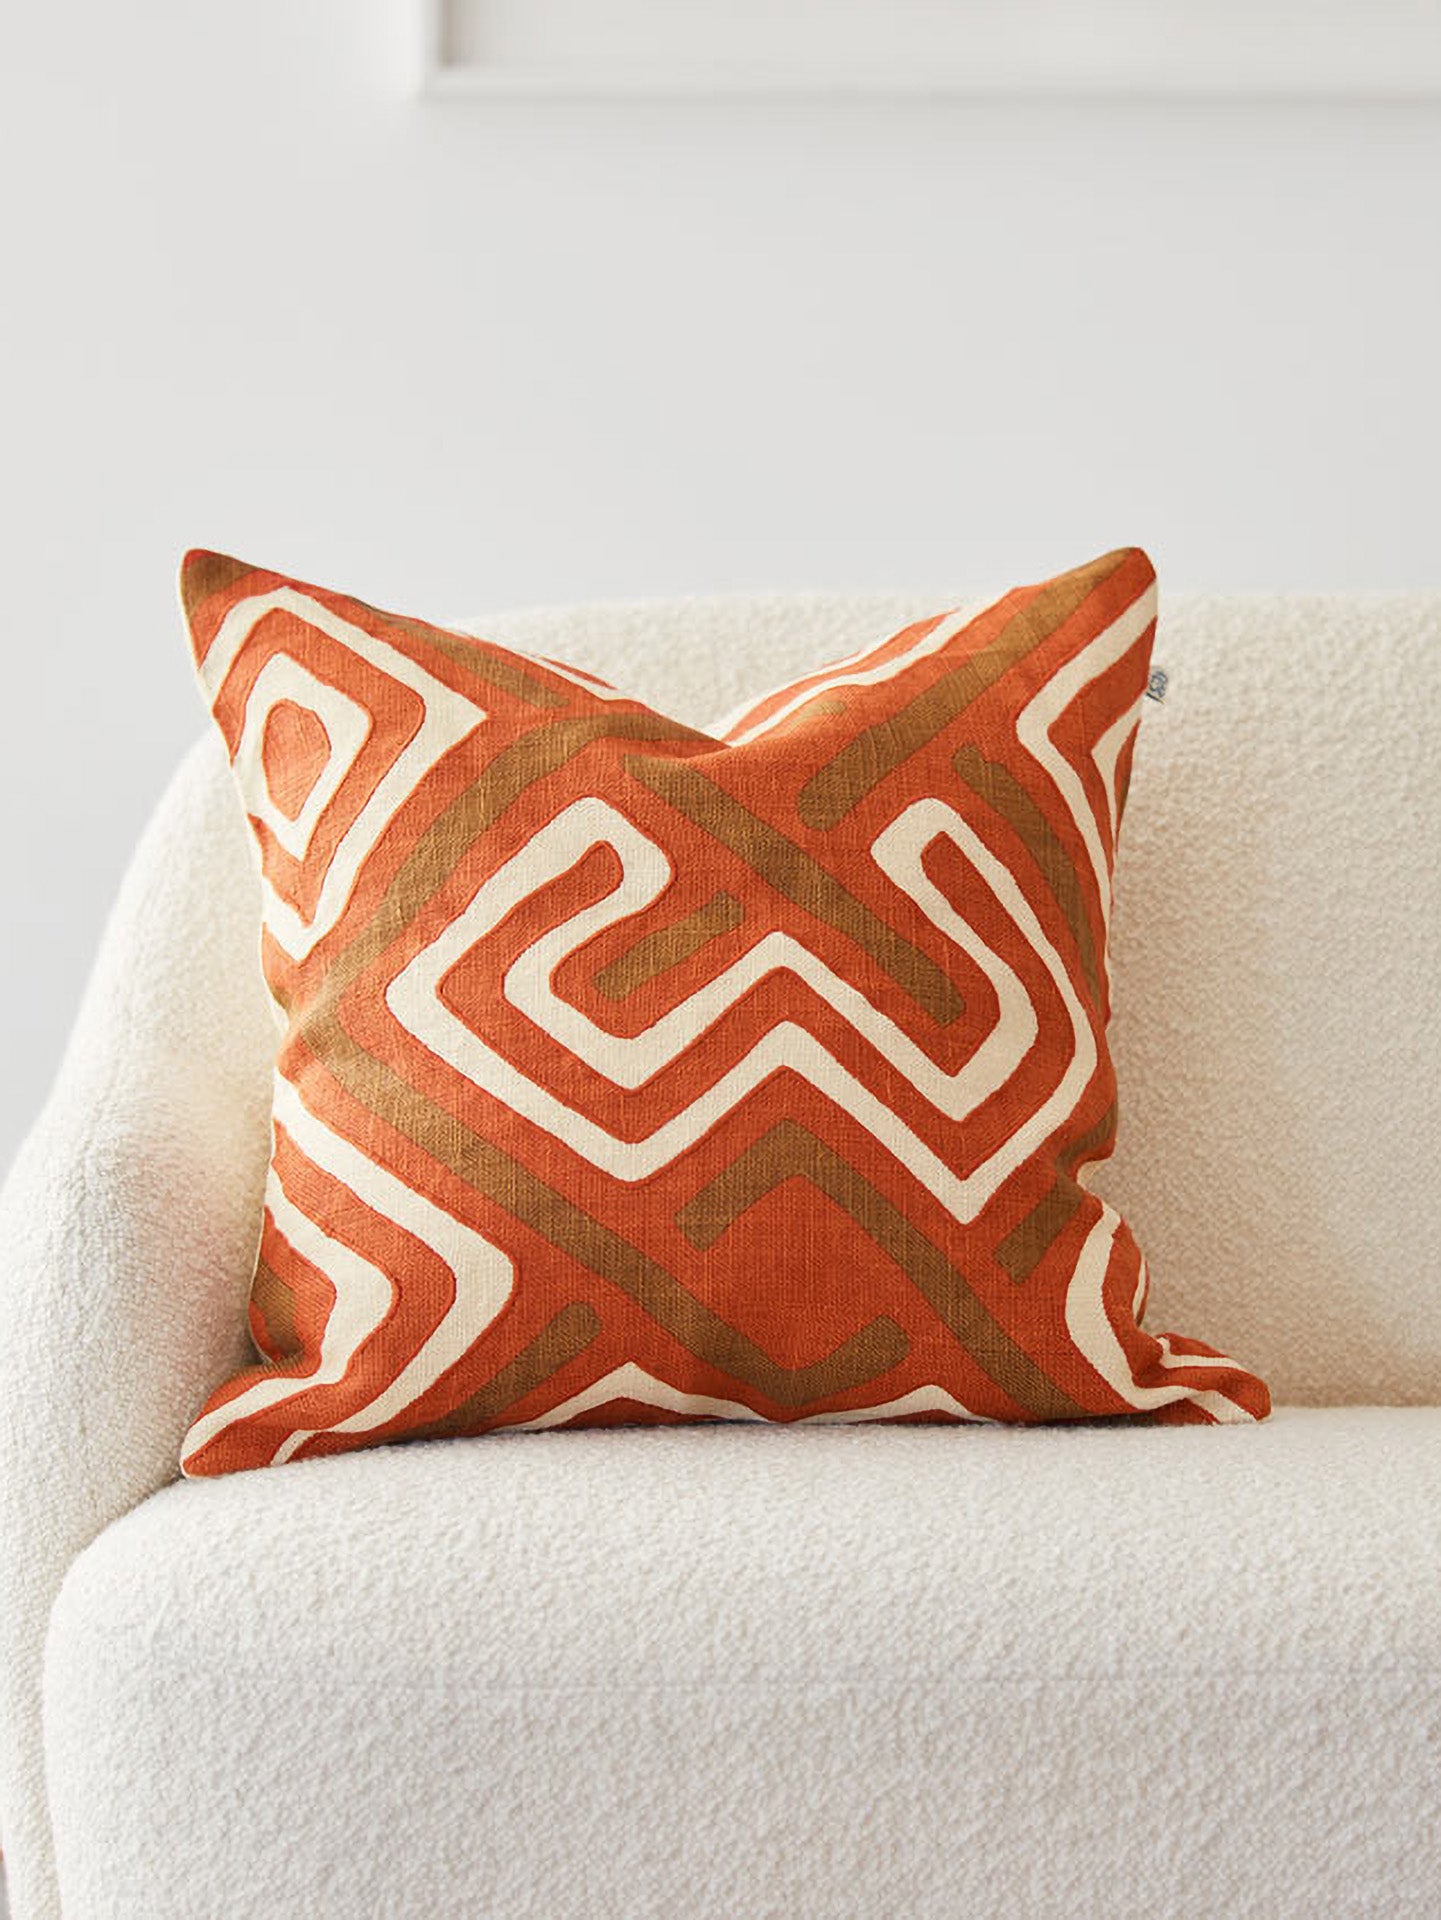 Gujarat Cushion Cover, Apricot/Taupe/Light Beige